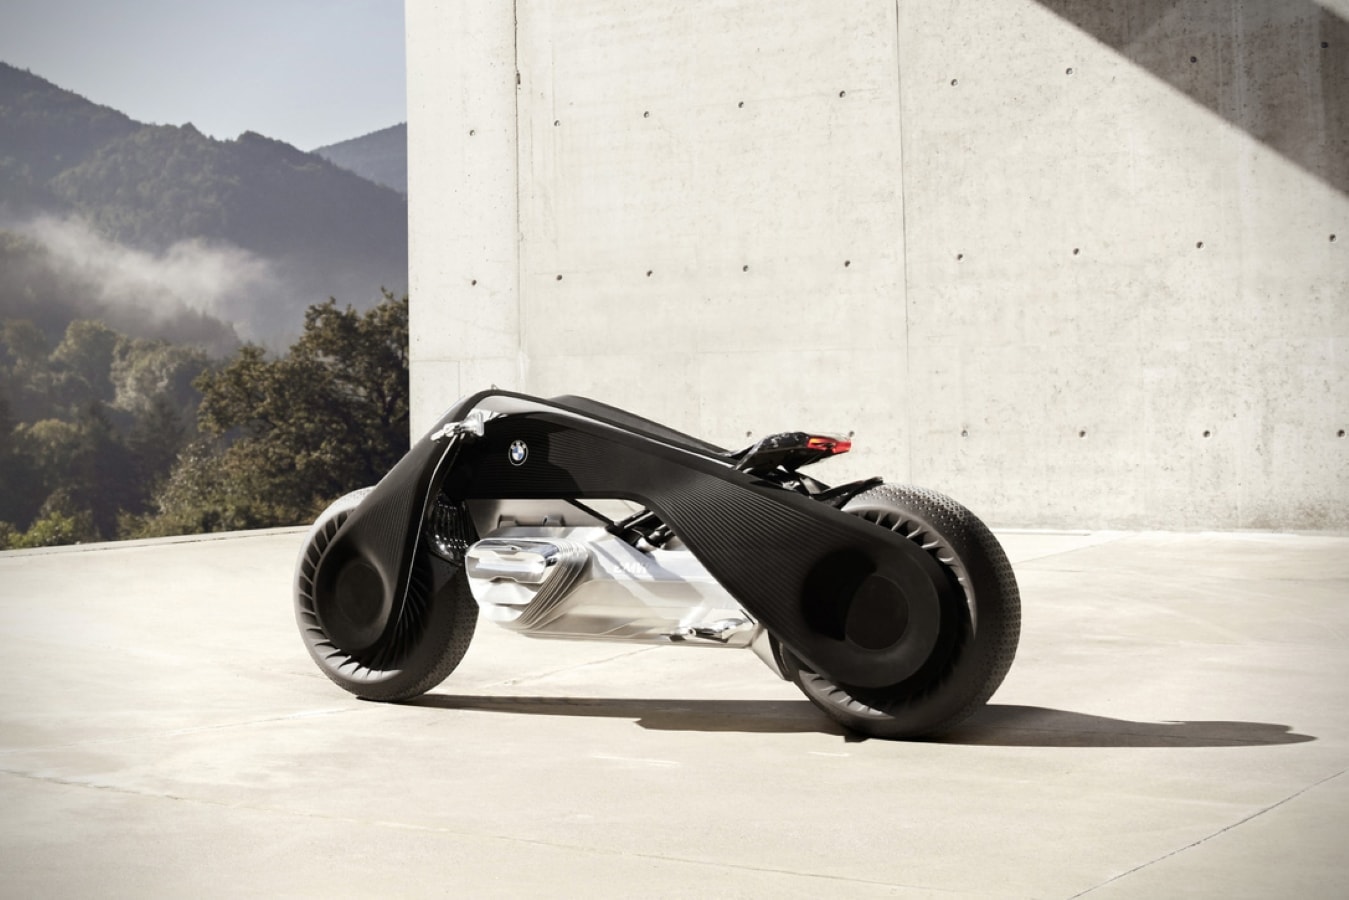 autonomous and fully connected BMW VISION NEXT 100 motorcycle